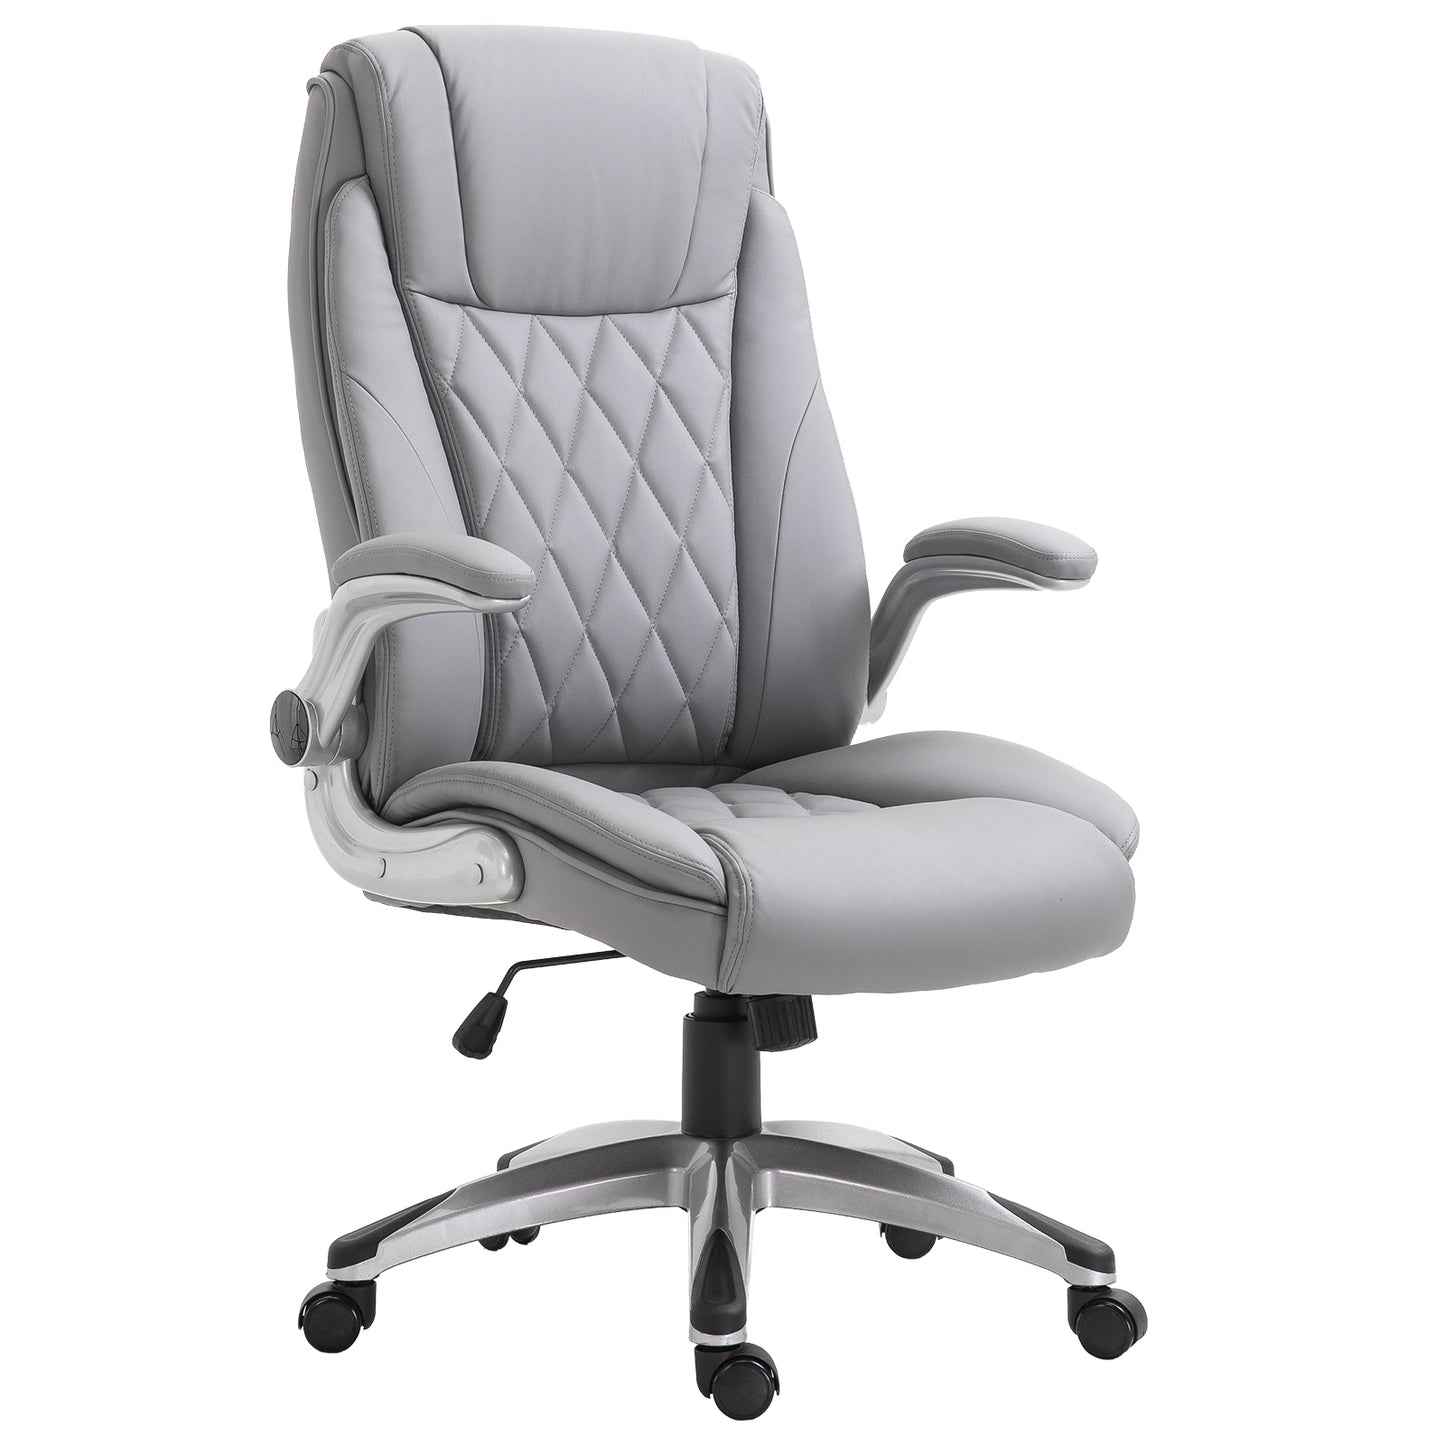 Vinsetto High Back Executive Office Chair Home Swivel PU Leather Ergonomic Chair, with Flip-up Arm, Wheels, Adjustable Height, Grey